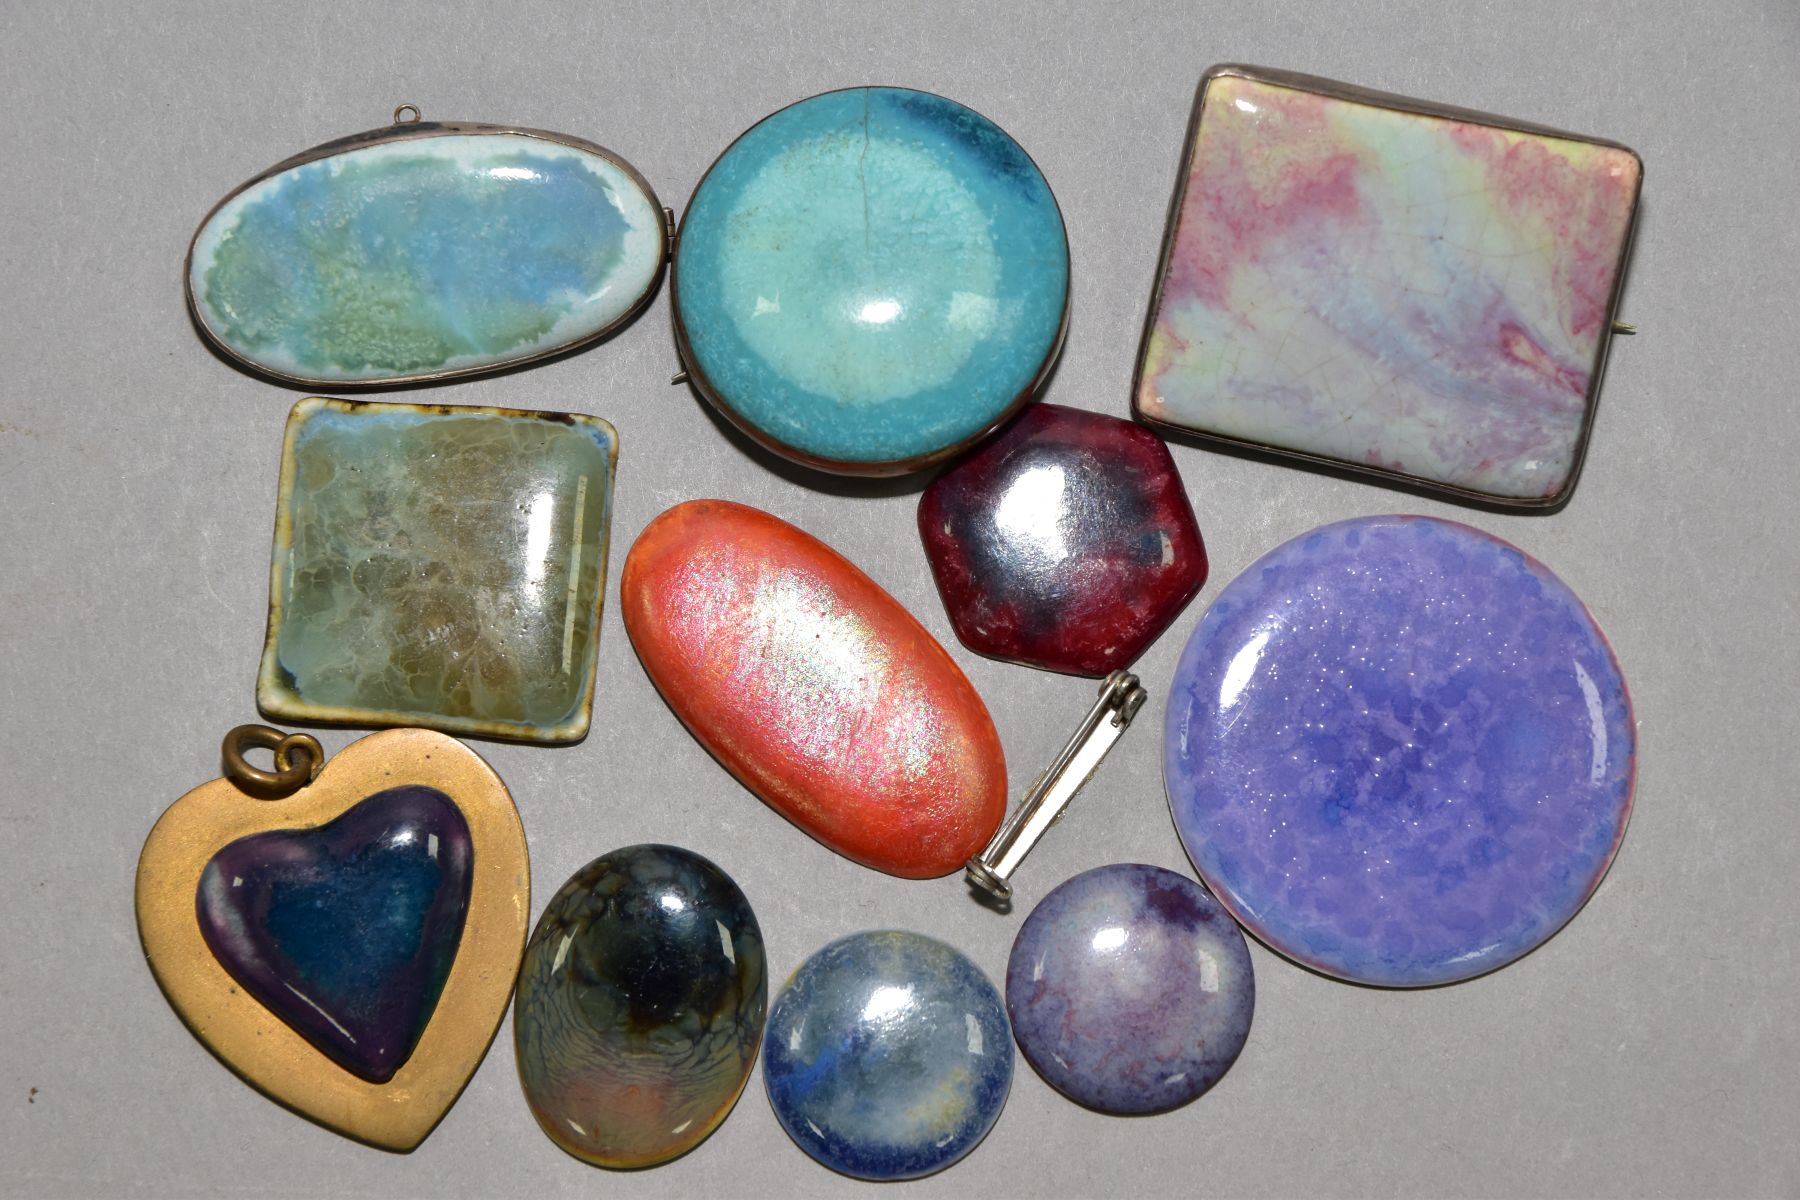 NINE RUSKIN ENAMELS, three mounted as brooches, together with two Ruskin style enamels, one